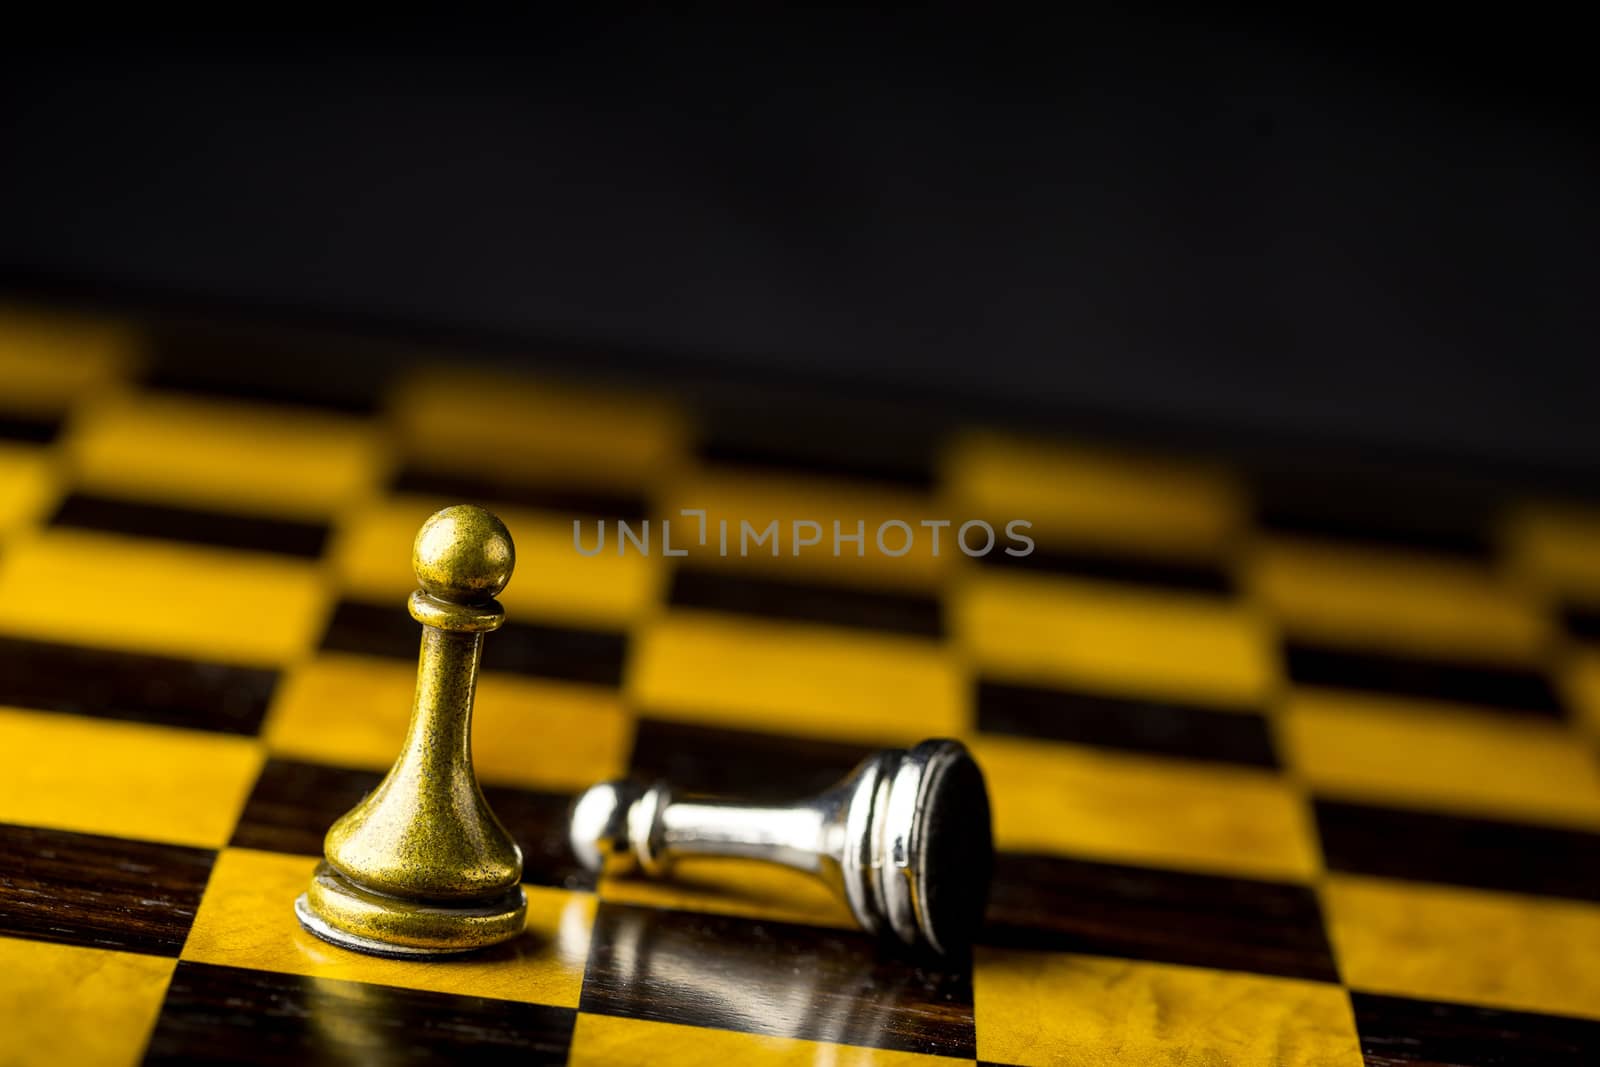 Chess business concept, leader & success by Alicephoto